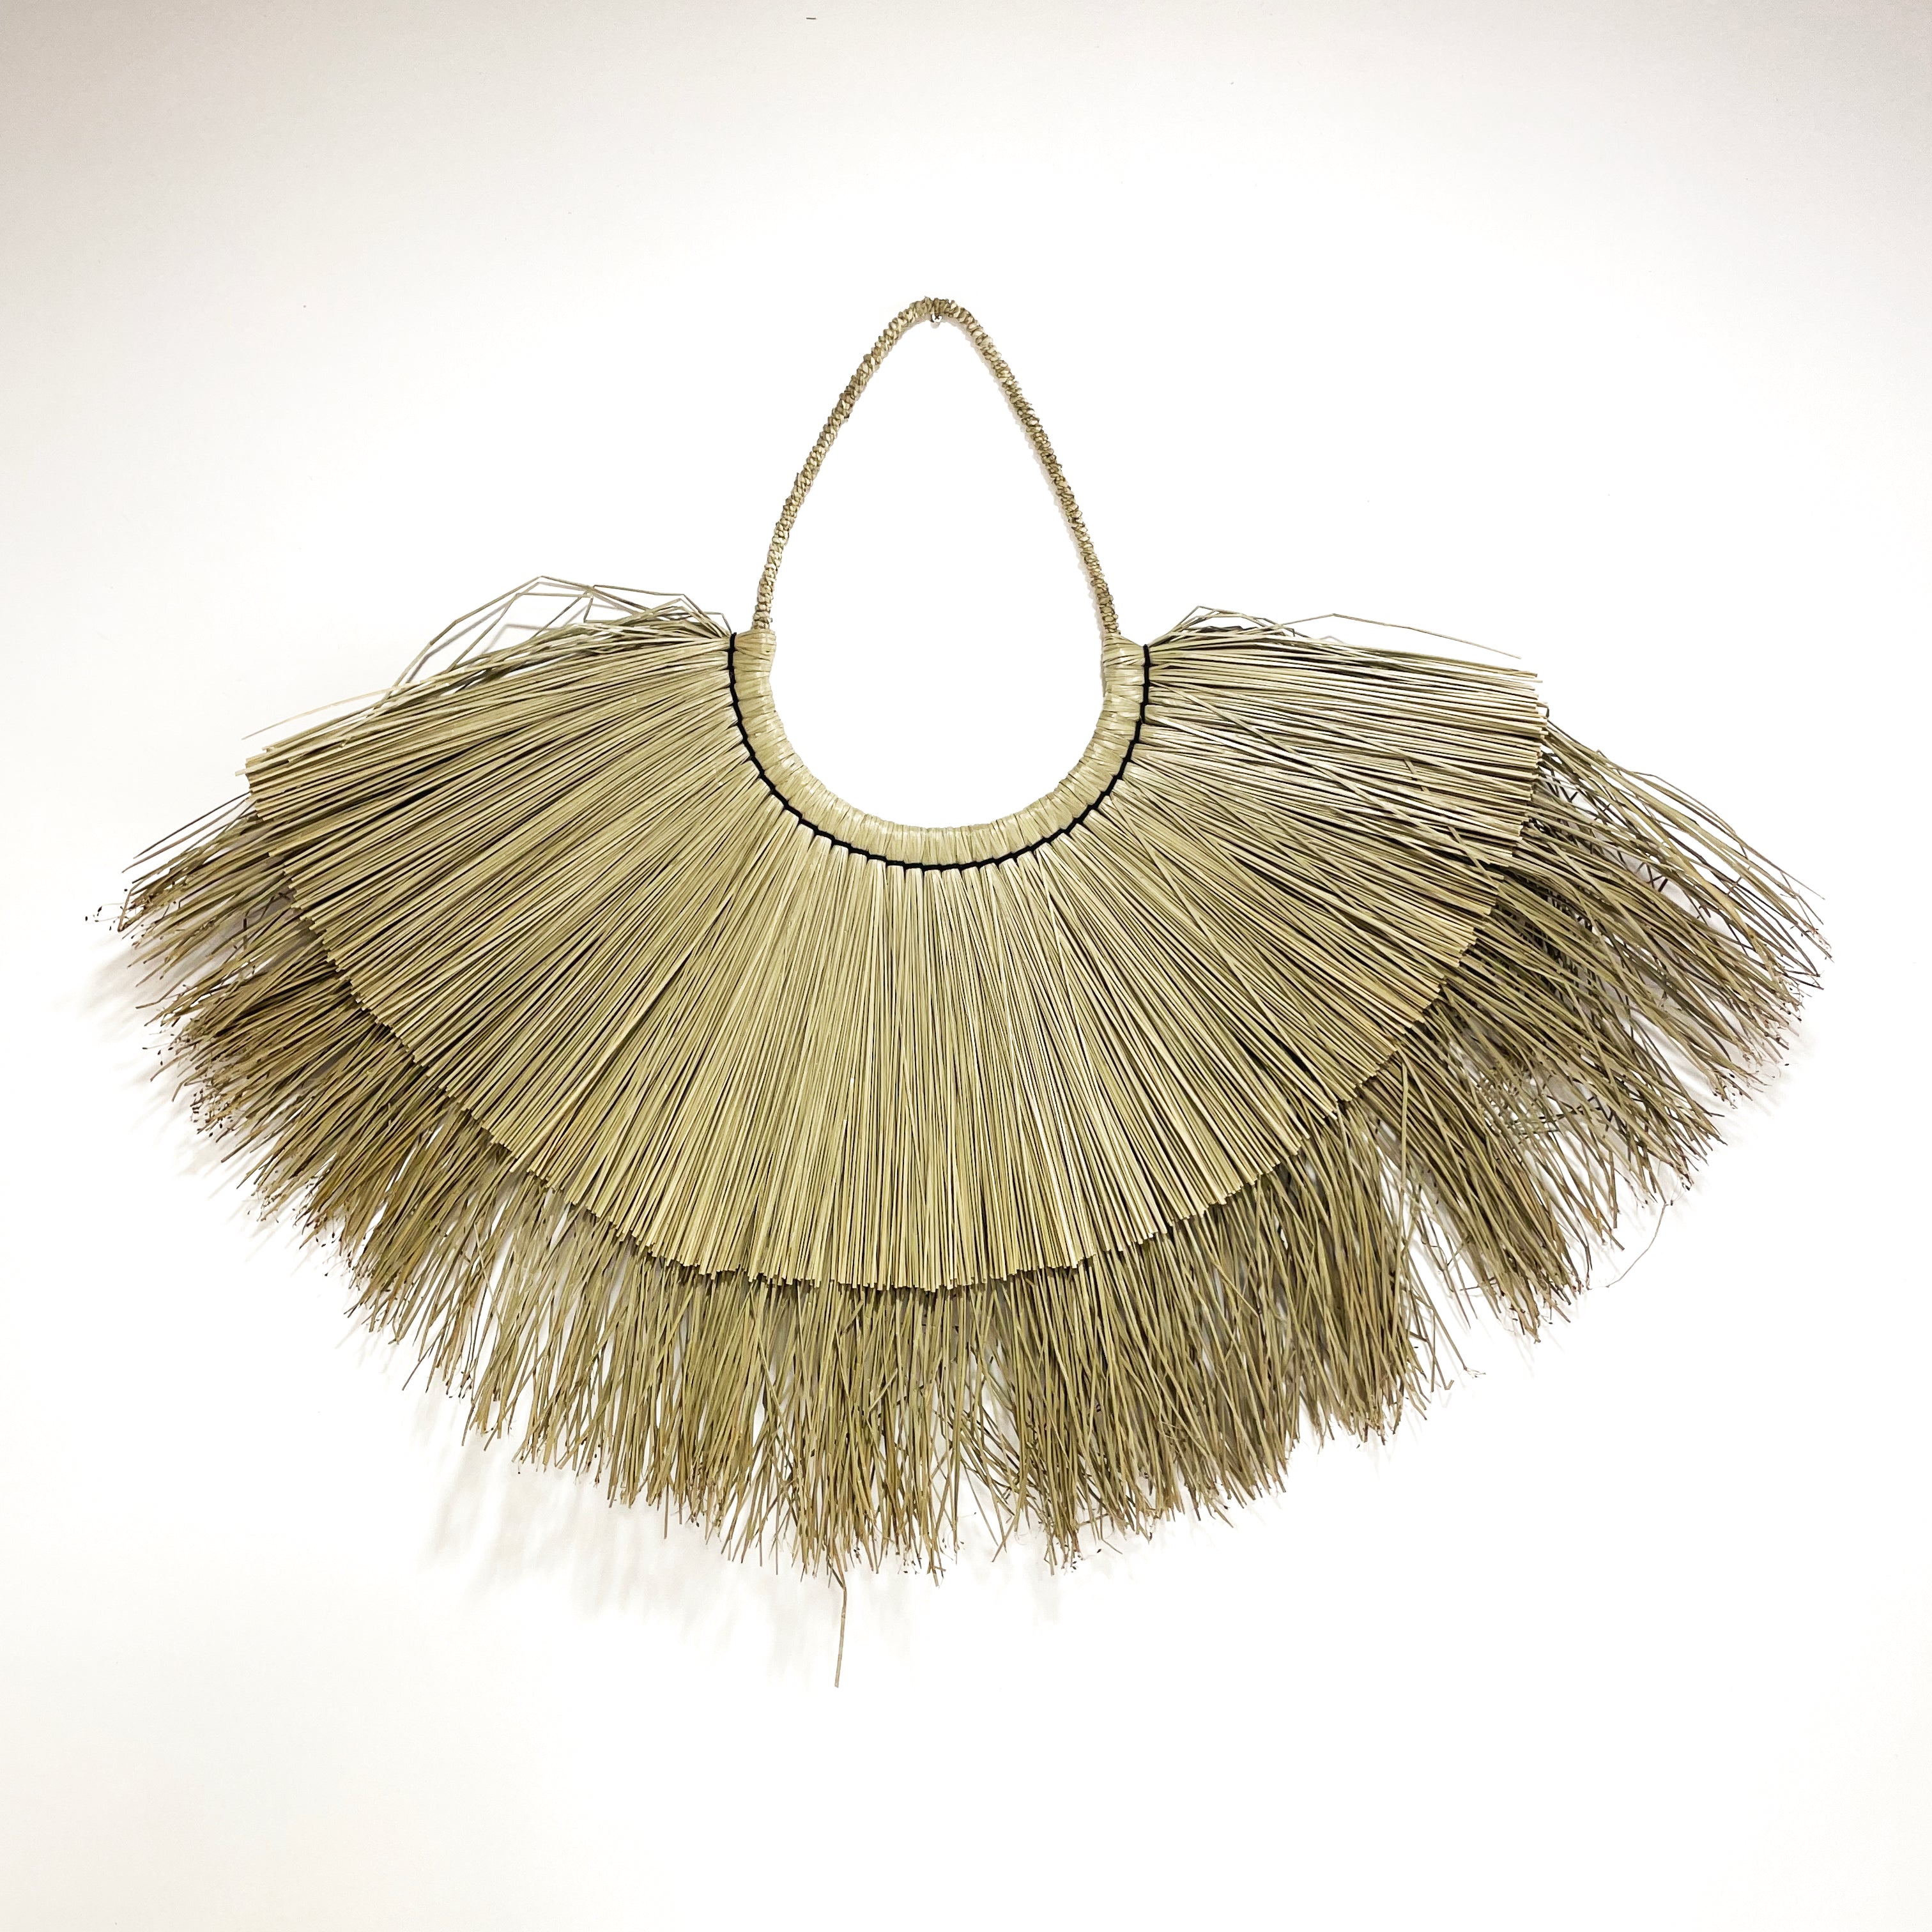 Large Full Grass Wall Hanging